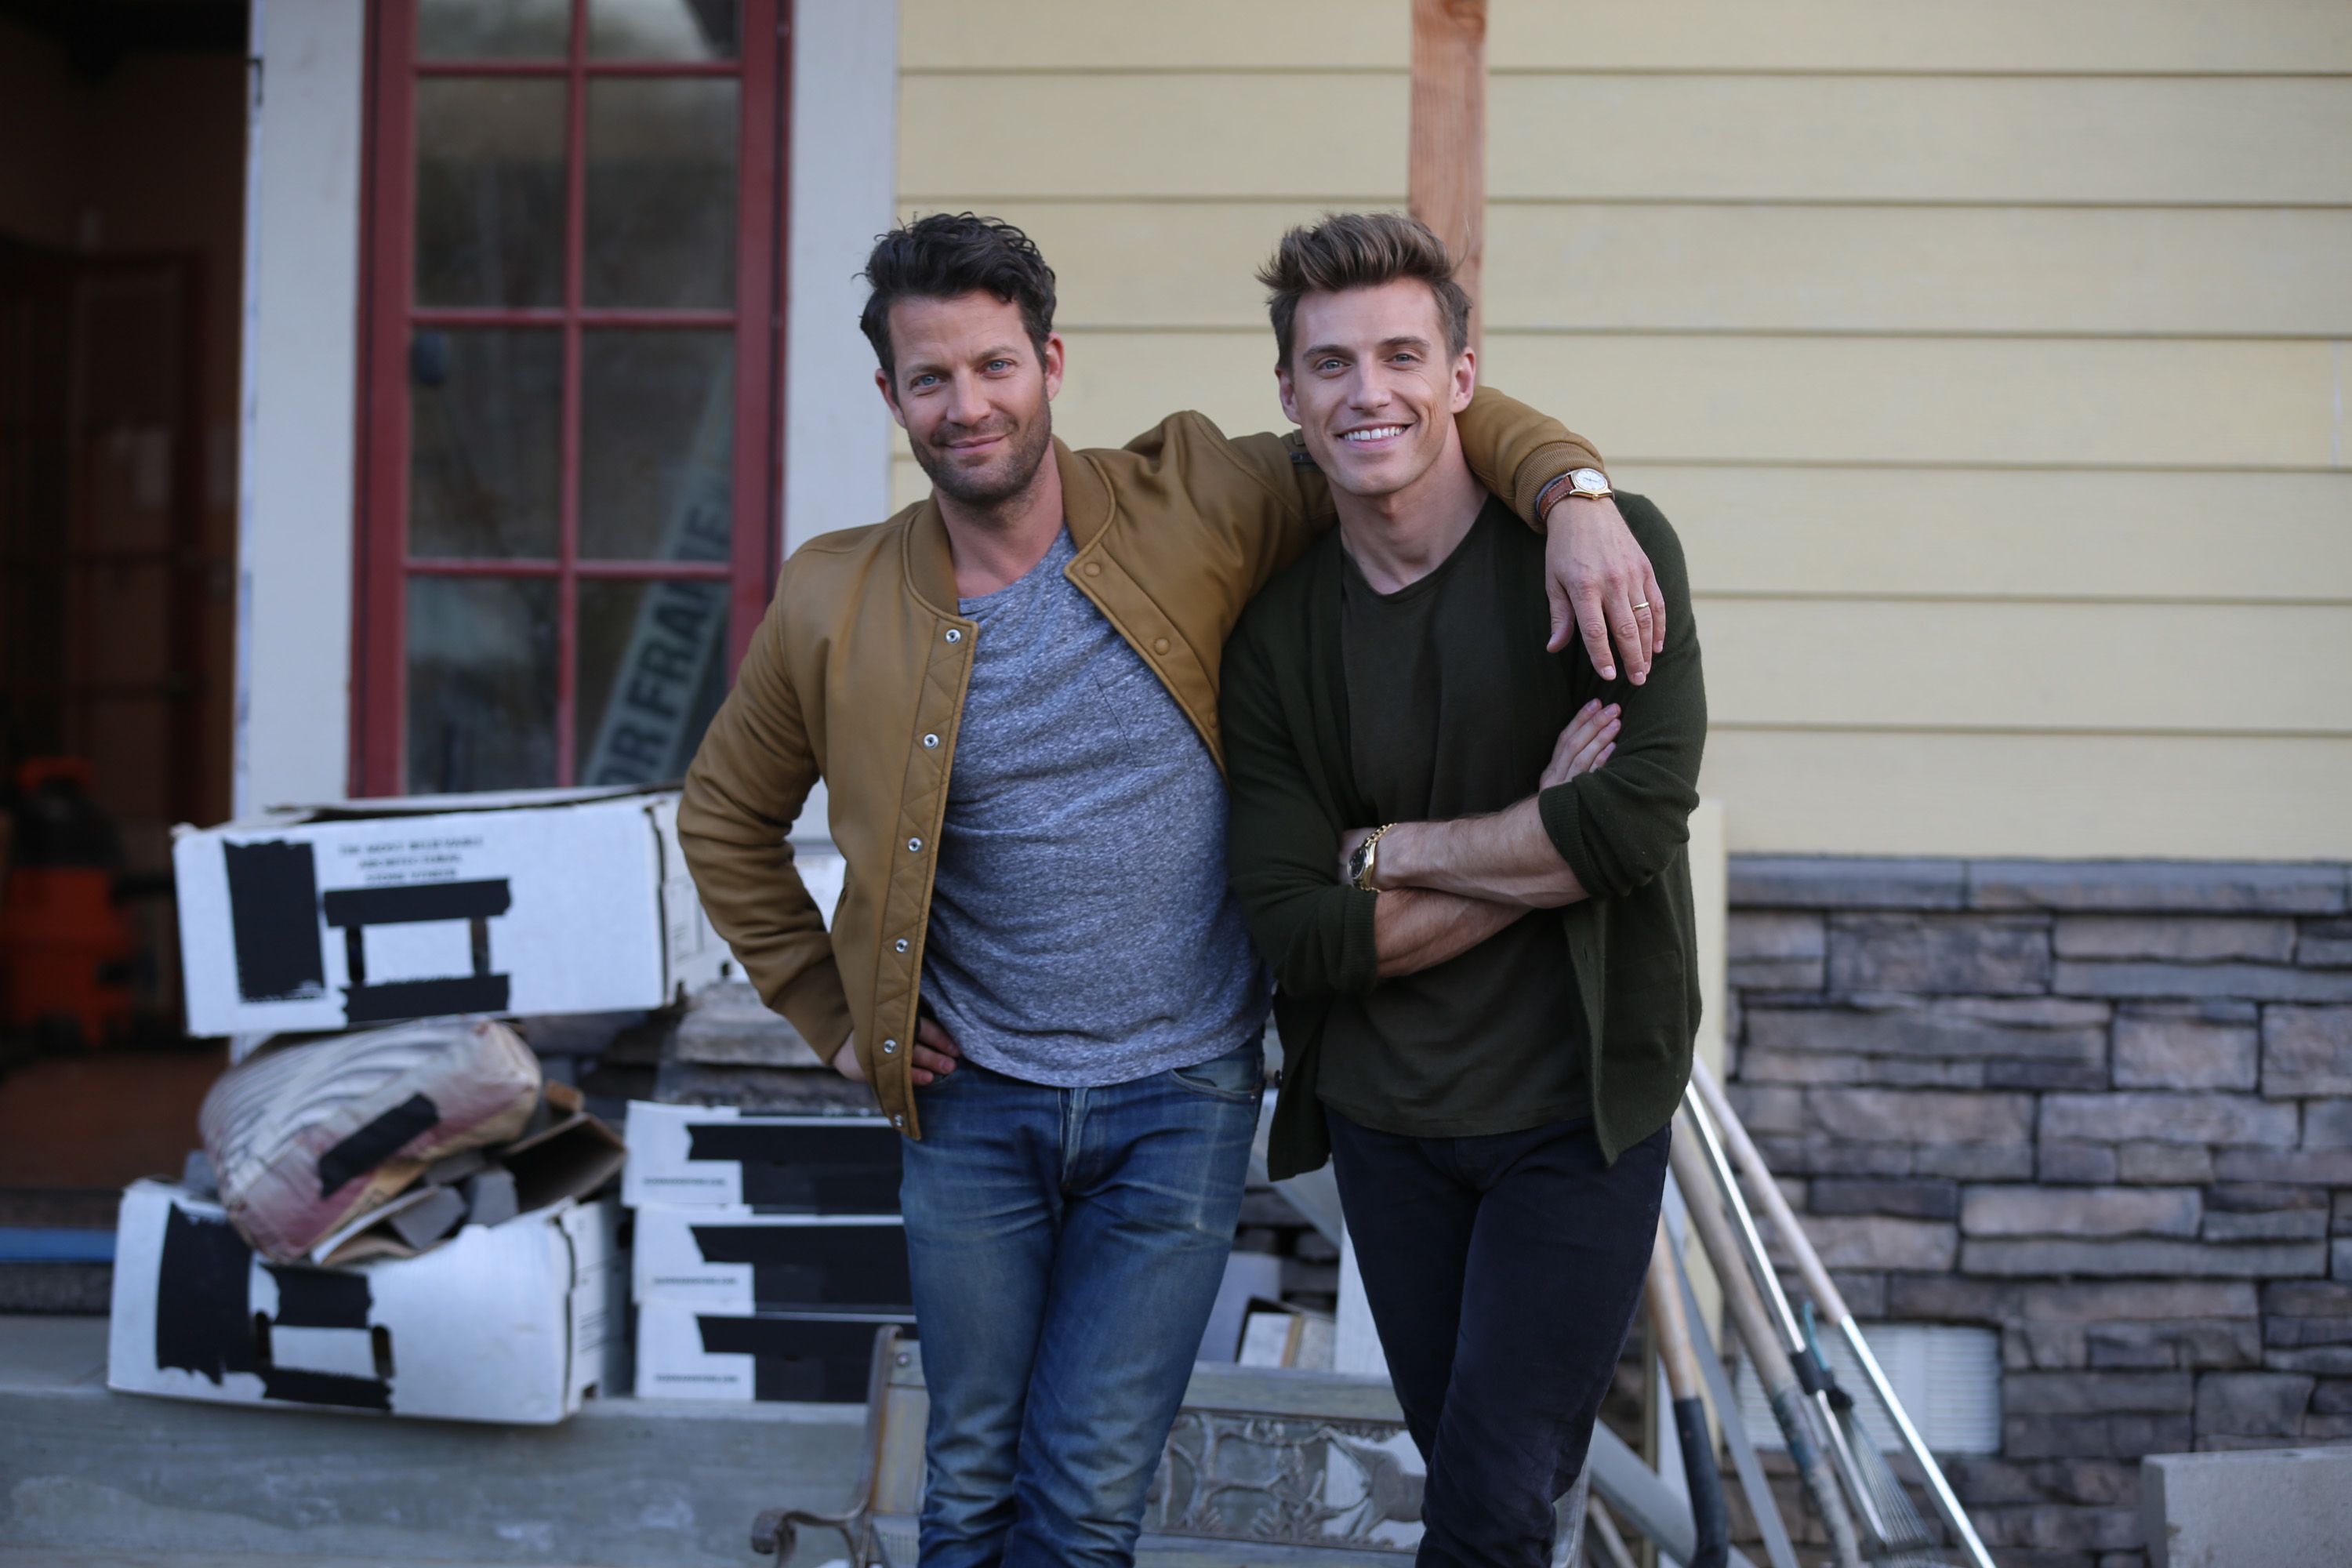 In surprising news to no one, Nate Berkus has very specific thoughts a